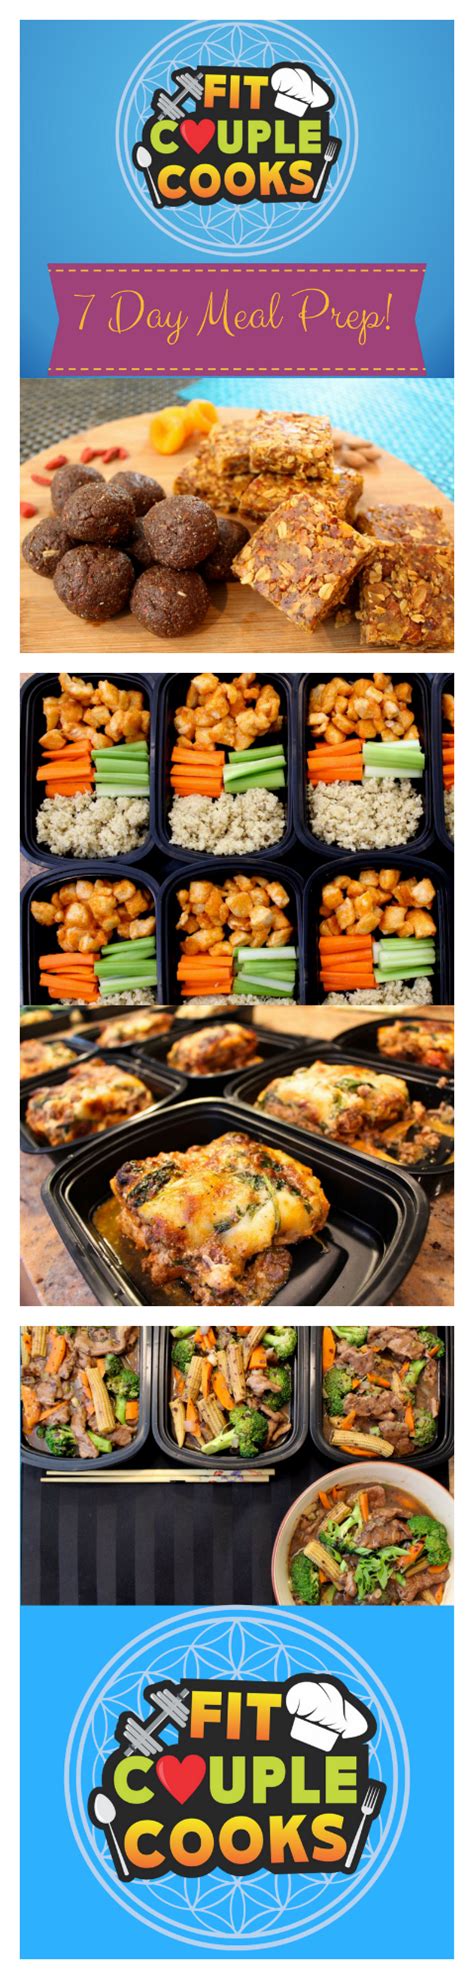 You Ve Been Asking So Here It Is A Full 7 Day Meal Prep Here Are The Links To The Recipes